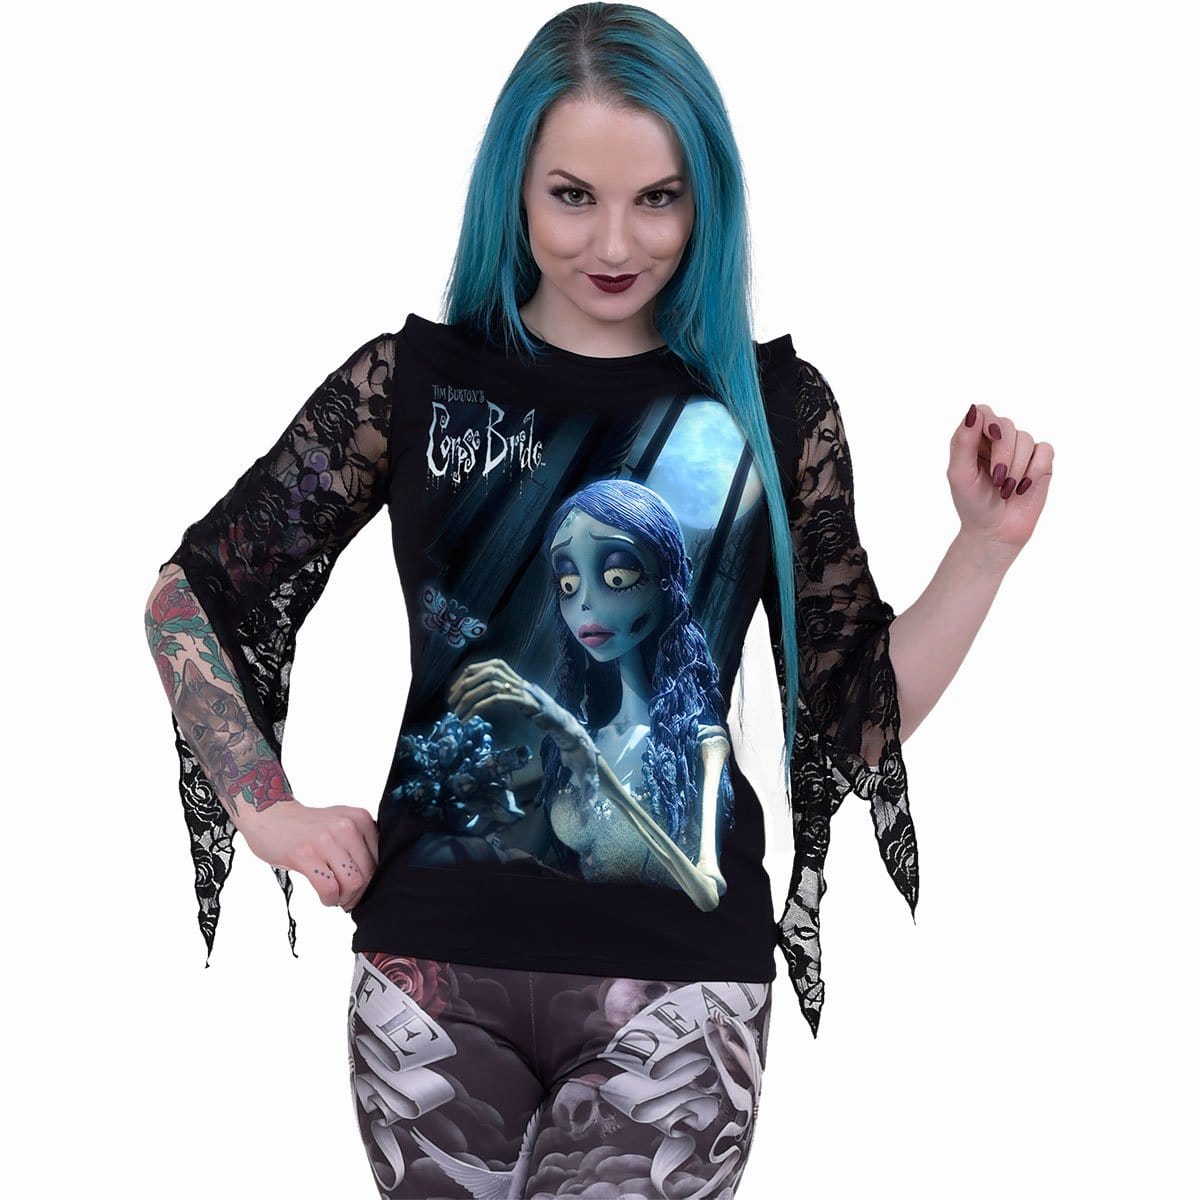 CORPSE BRIDE - GLOW IN THE DARK - Rose Lace Sleeve Top - Spiral USA